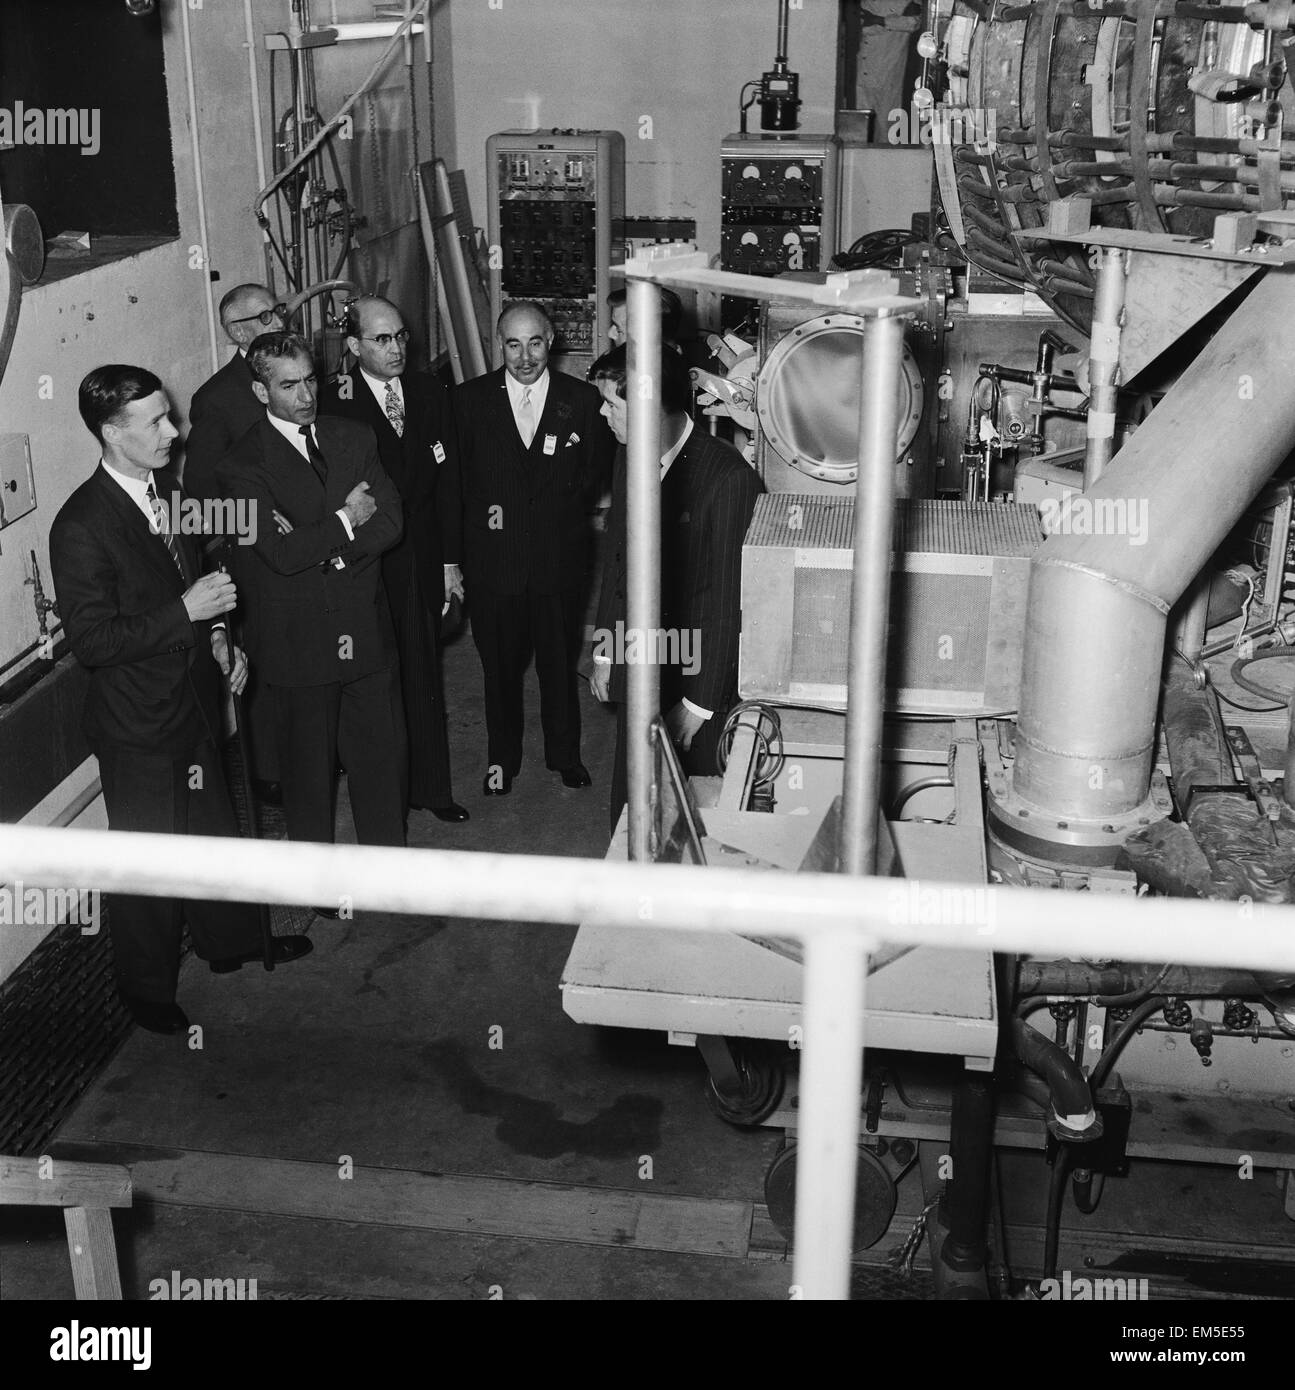 Mohammad-Reza Shah Pahlavi, the Shah of Iran, pictured during his visit to the Atomic Energy Authority's Establishment in Harwell on his visit to Britain. 7th May 1959. Stock Photo